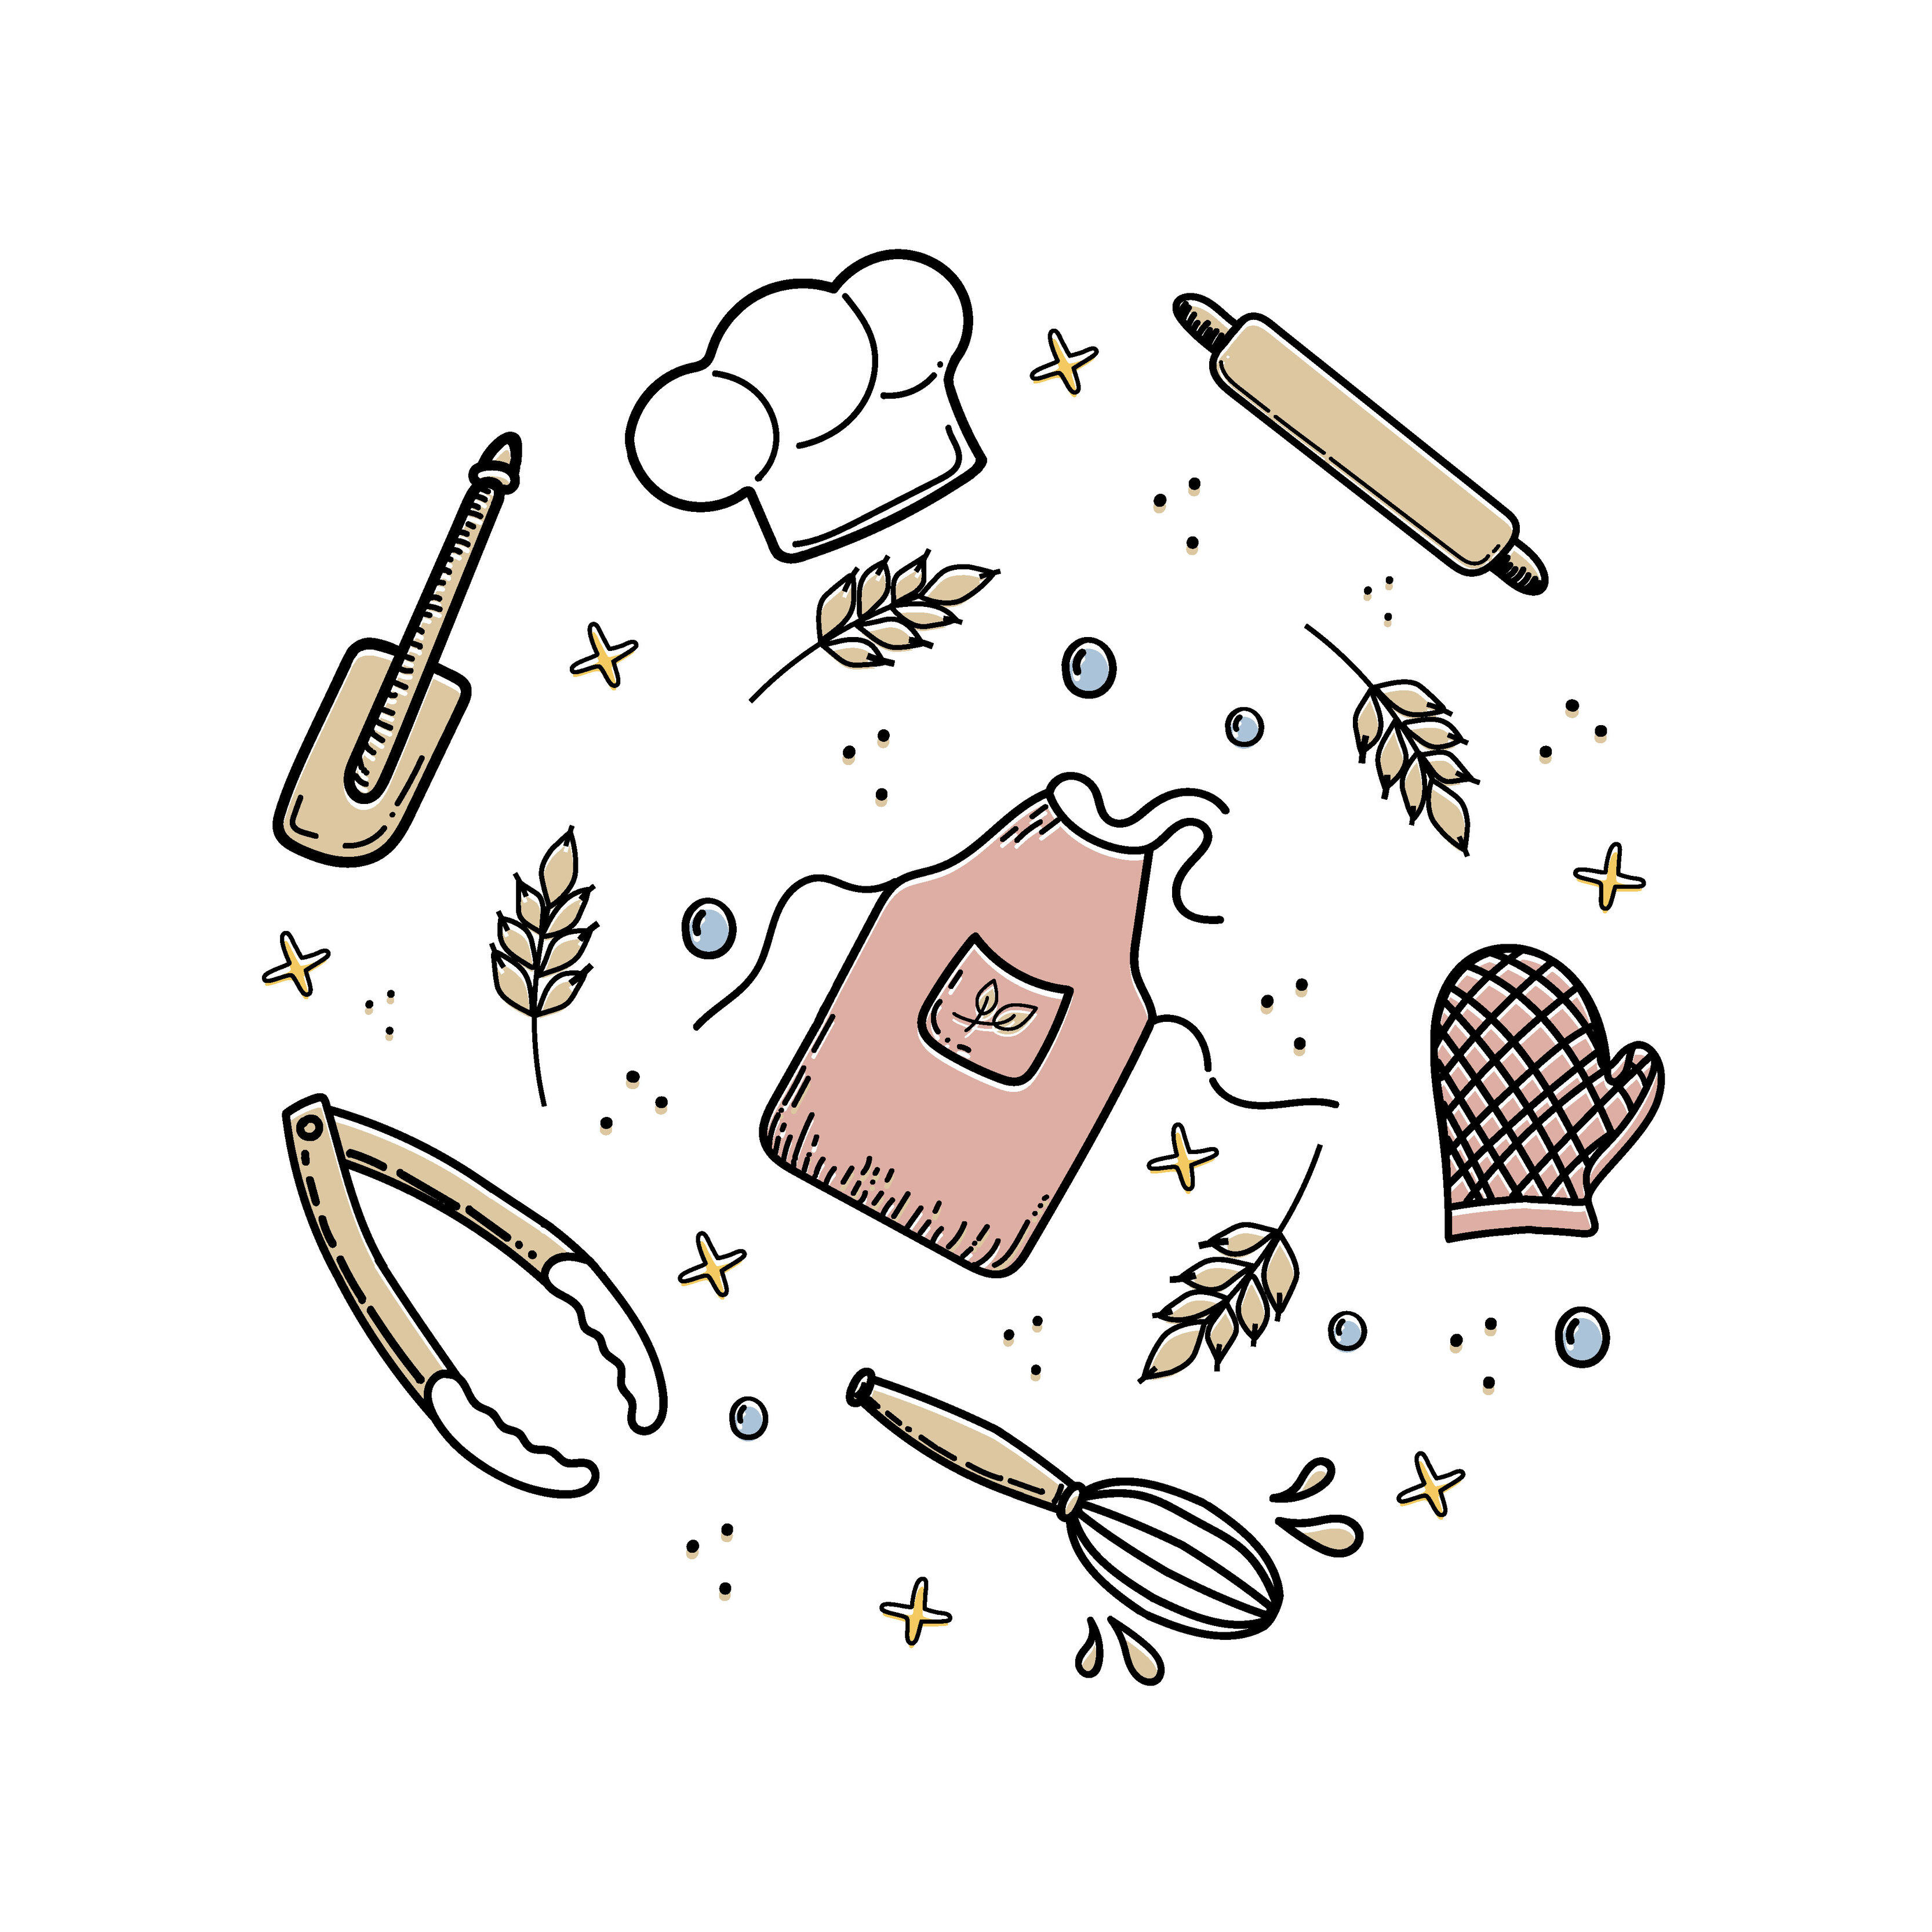 https://static.vecteezy.com/system/resources/previews/005/760/043/original/hand-drawn-chef-s-tools-and-clothes-in-doodle-style-elements-arranged-in-a-circle-wheat-cook-s-cap-apron-and-oven-mitts-scoop-spatula-and-tongs-vector.jpg